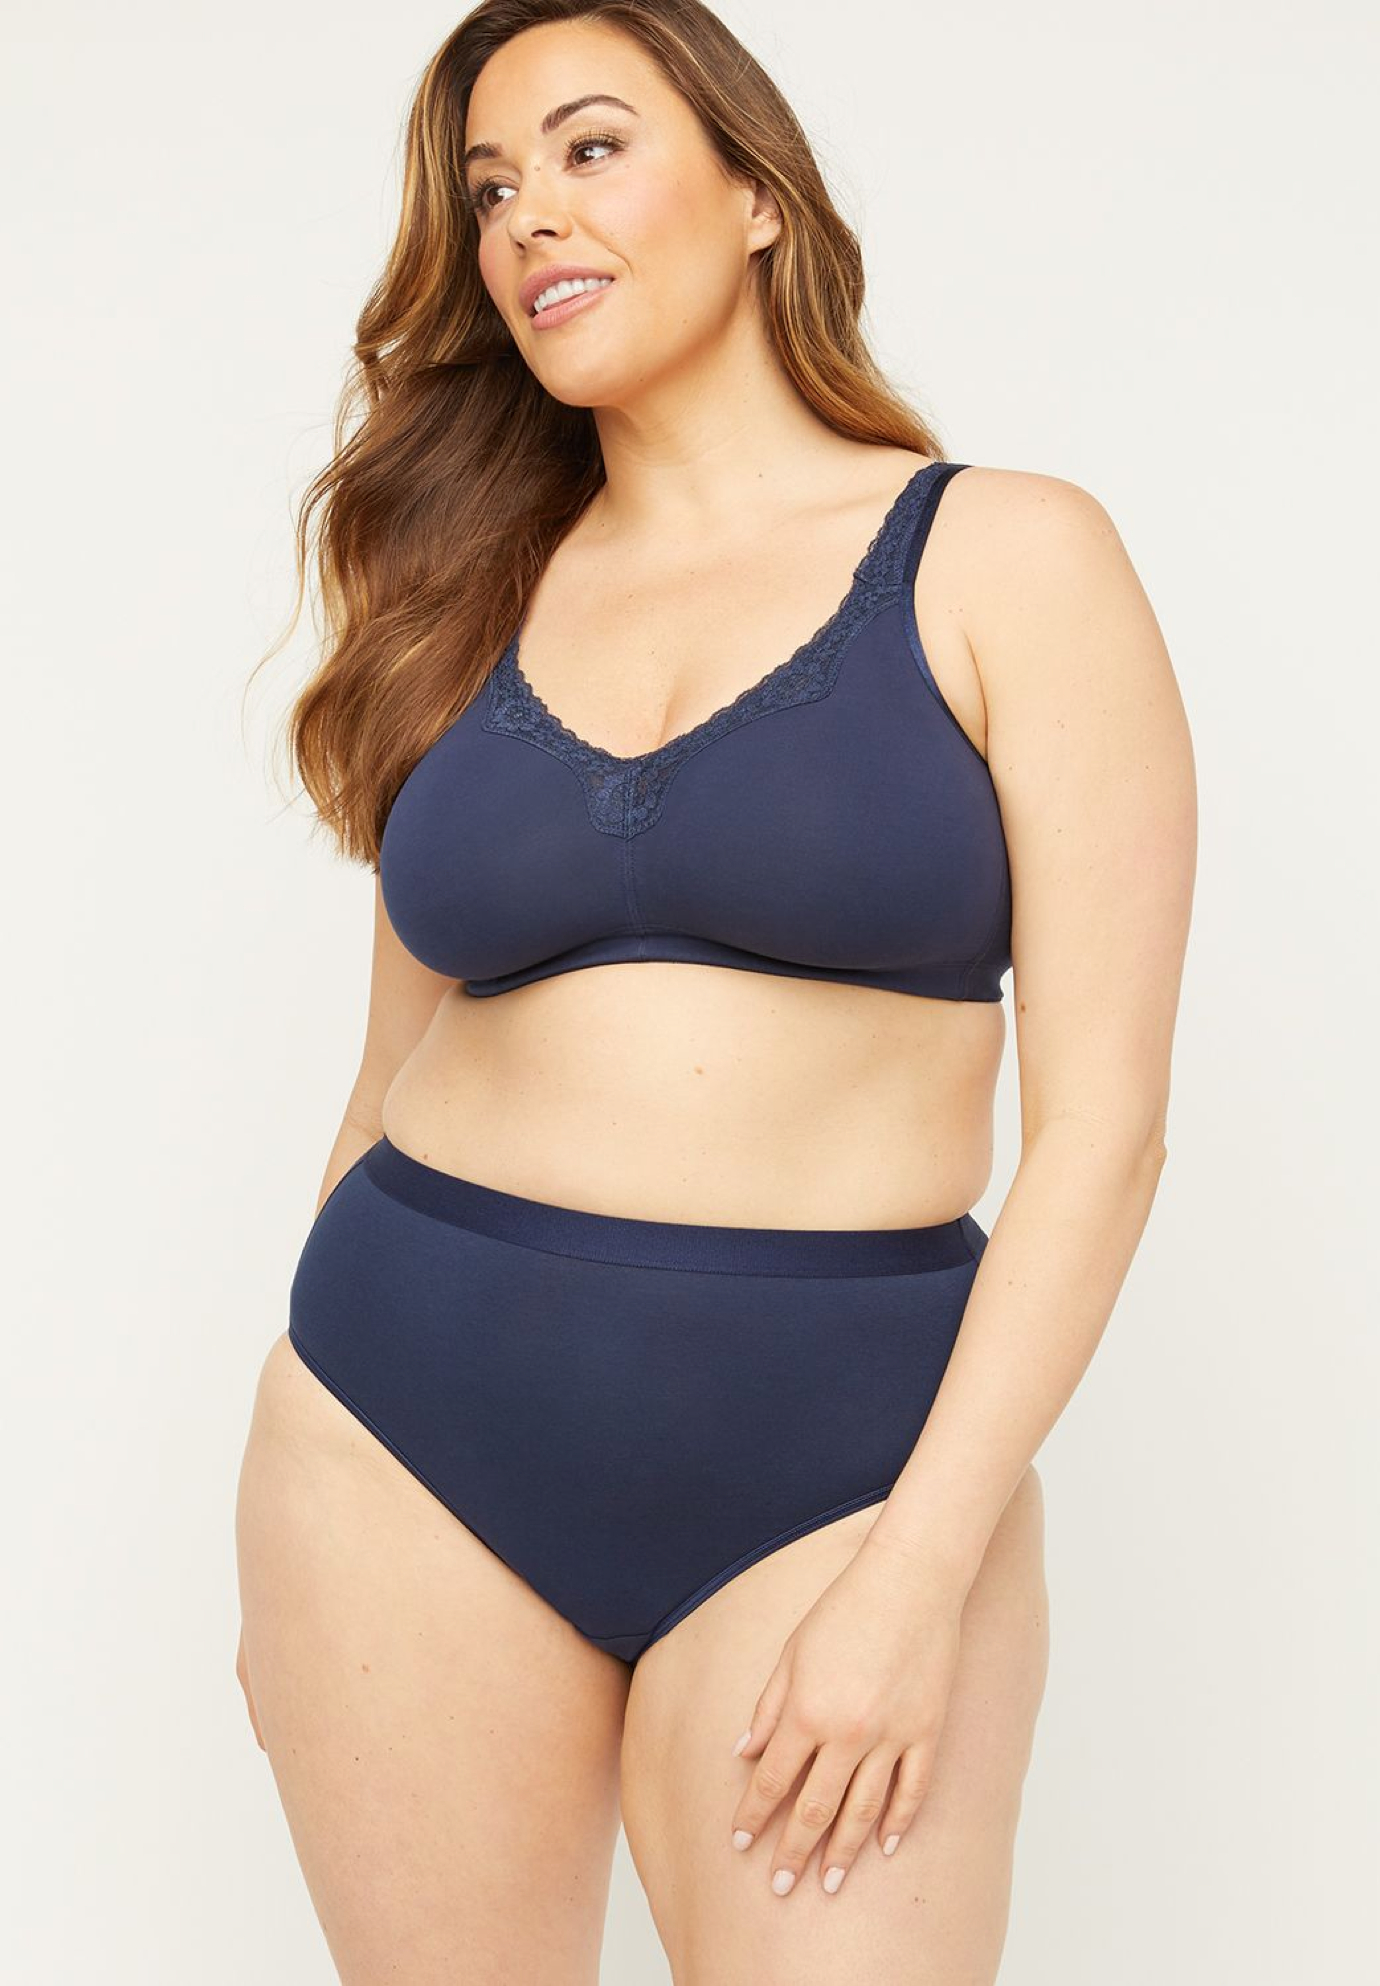 Catherines Plus Sizes - Also introducing: Intimates For All! Find